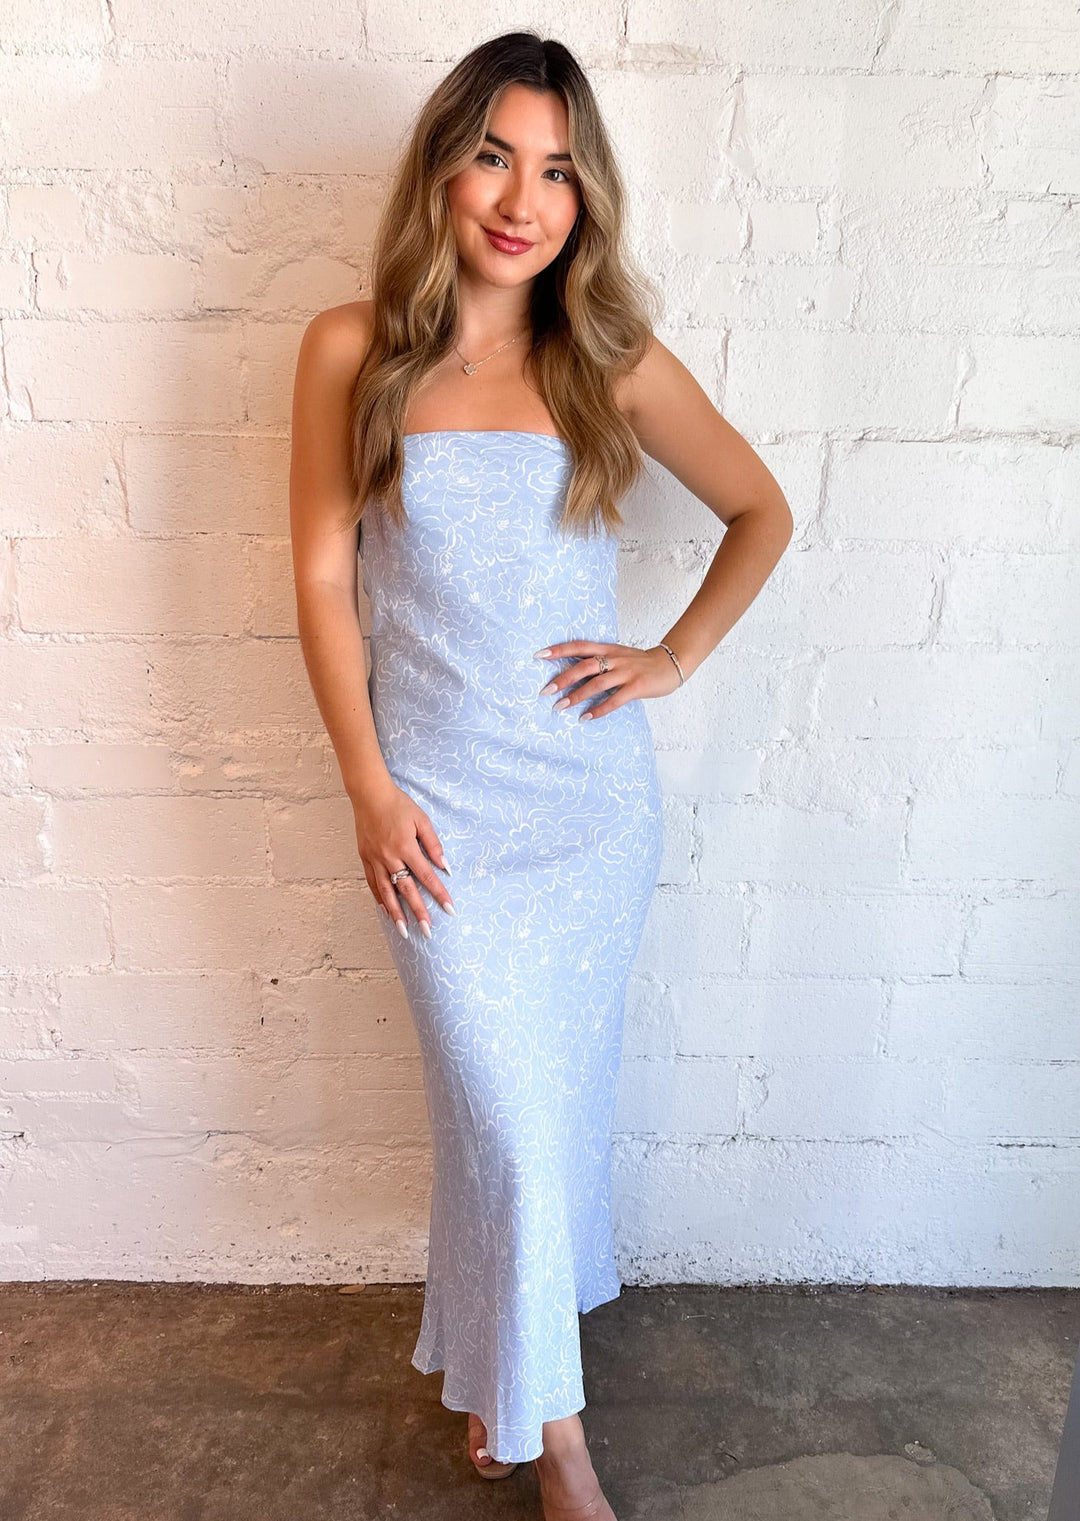 Chambray Skies Dress, Dresses, Adeline, Adeline, dallas boutique, dallas texas, texas boutique, women's boutique dallas, adeline boutique, dallas boutique, trendy boutique, affordable boutique